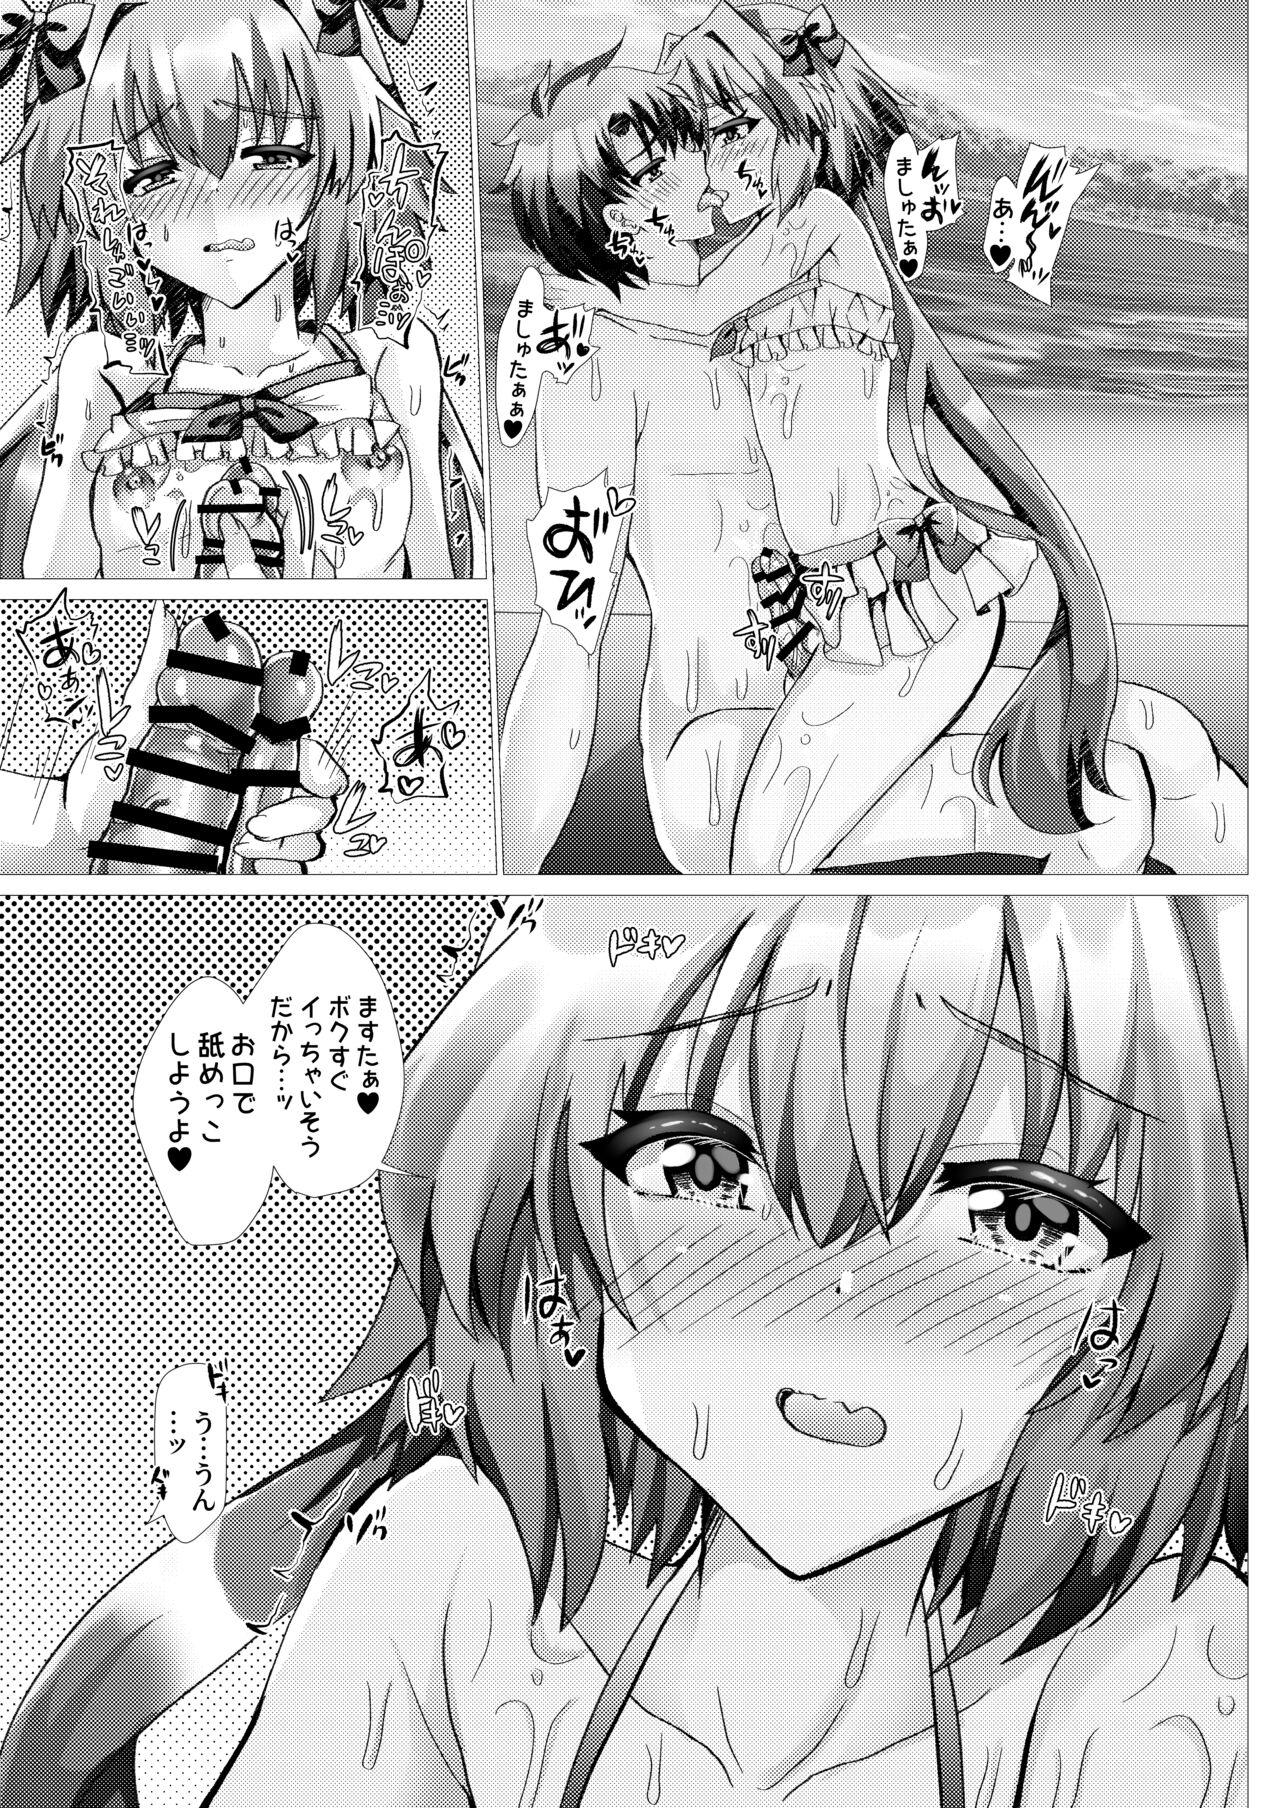 Sex Party Astolfo to Summer Vacation + Omake - Fate grand order Caught - Page 10